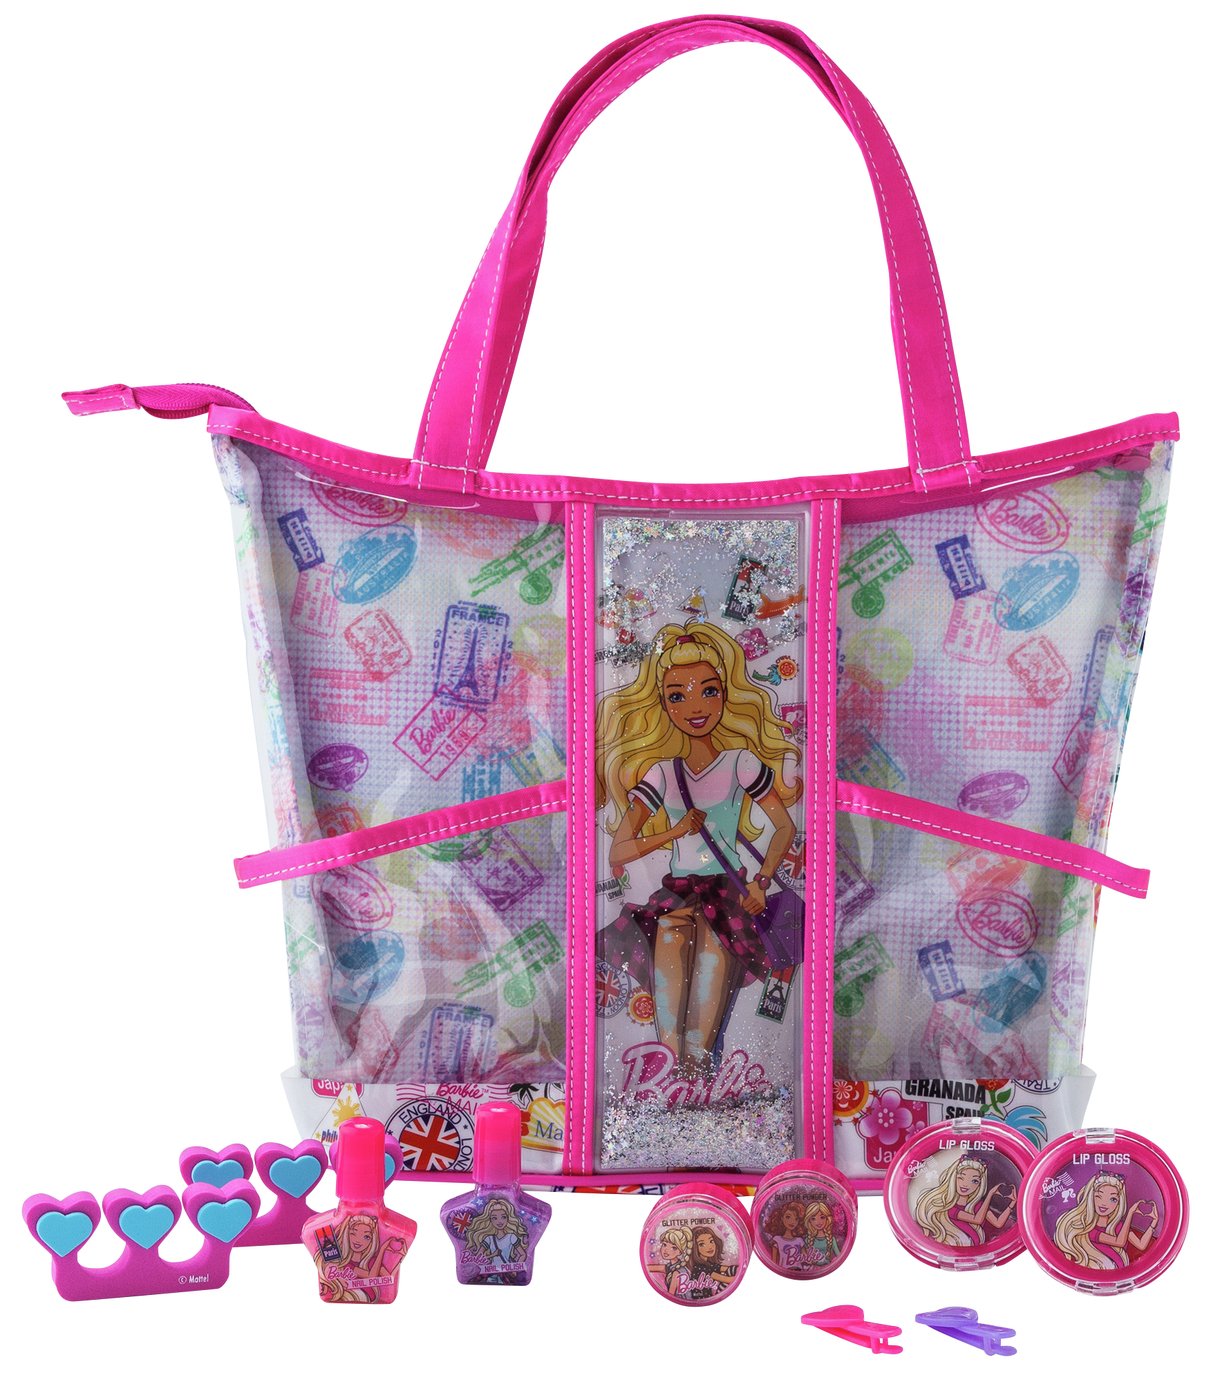 Barbie Express Yourself Beauty Tote Reviews